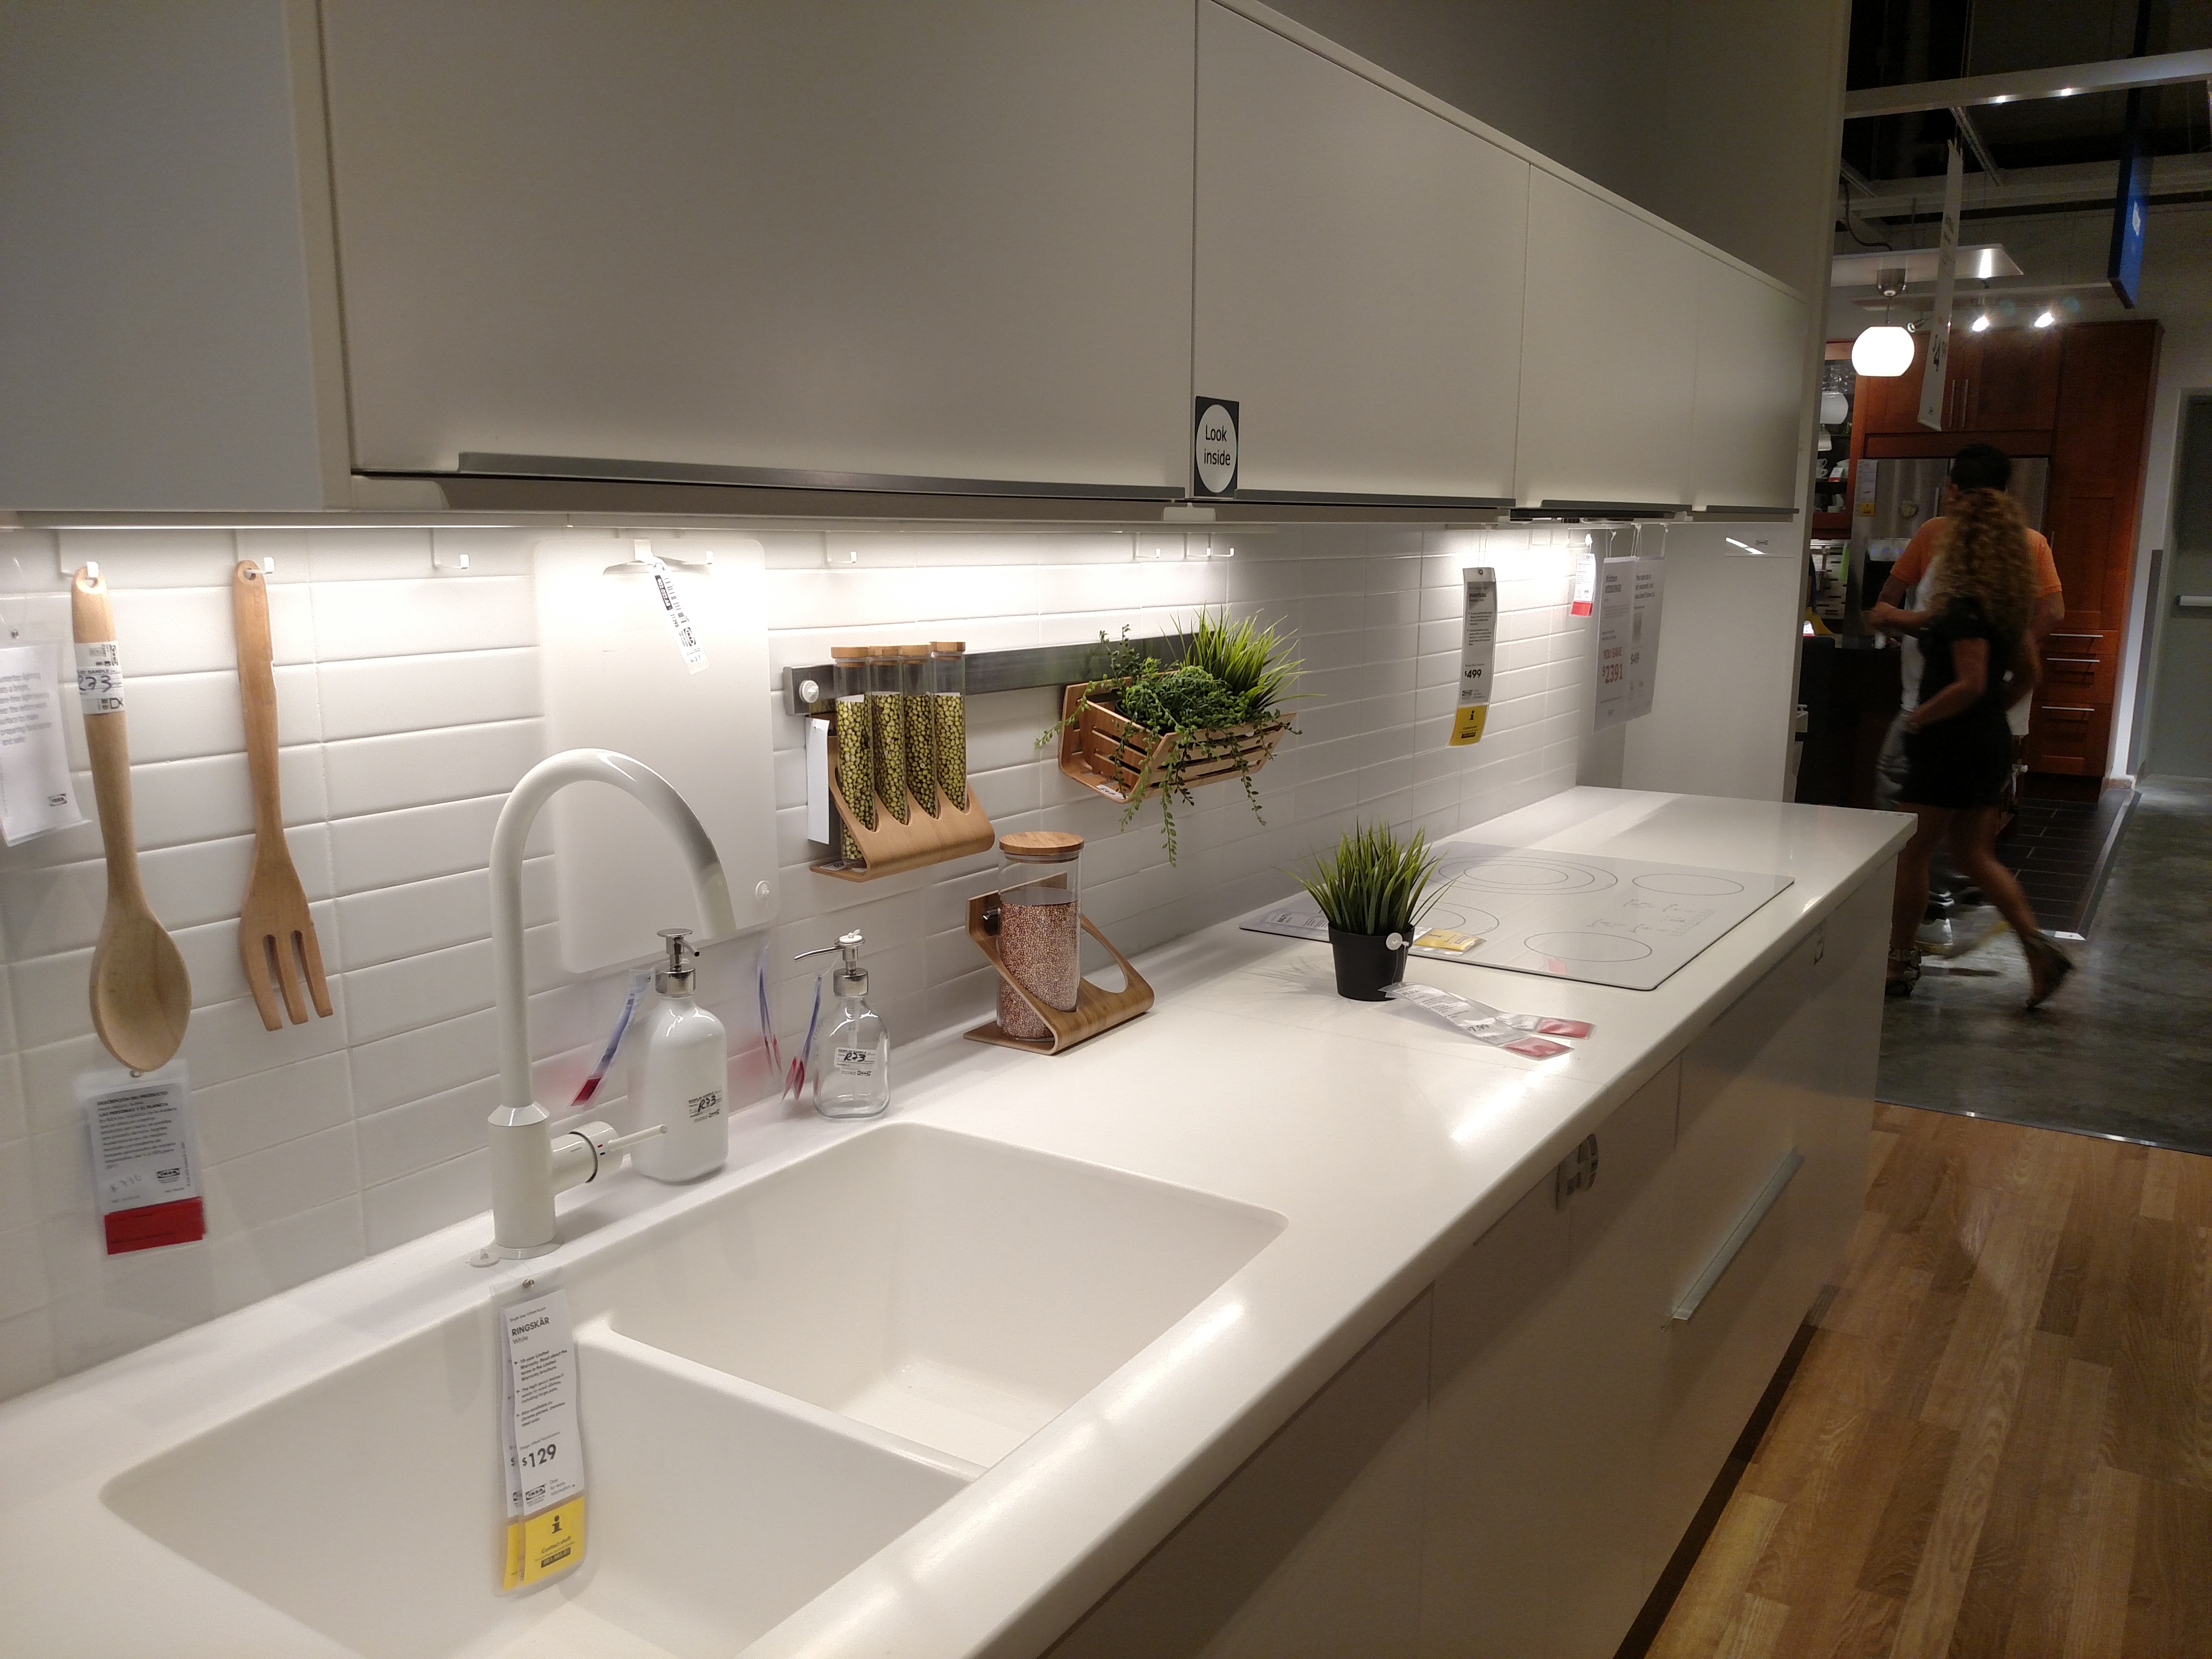 The Curious Case of IKEA’s Invisible Kitchen Sink